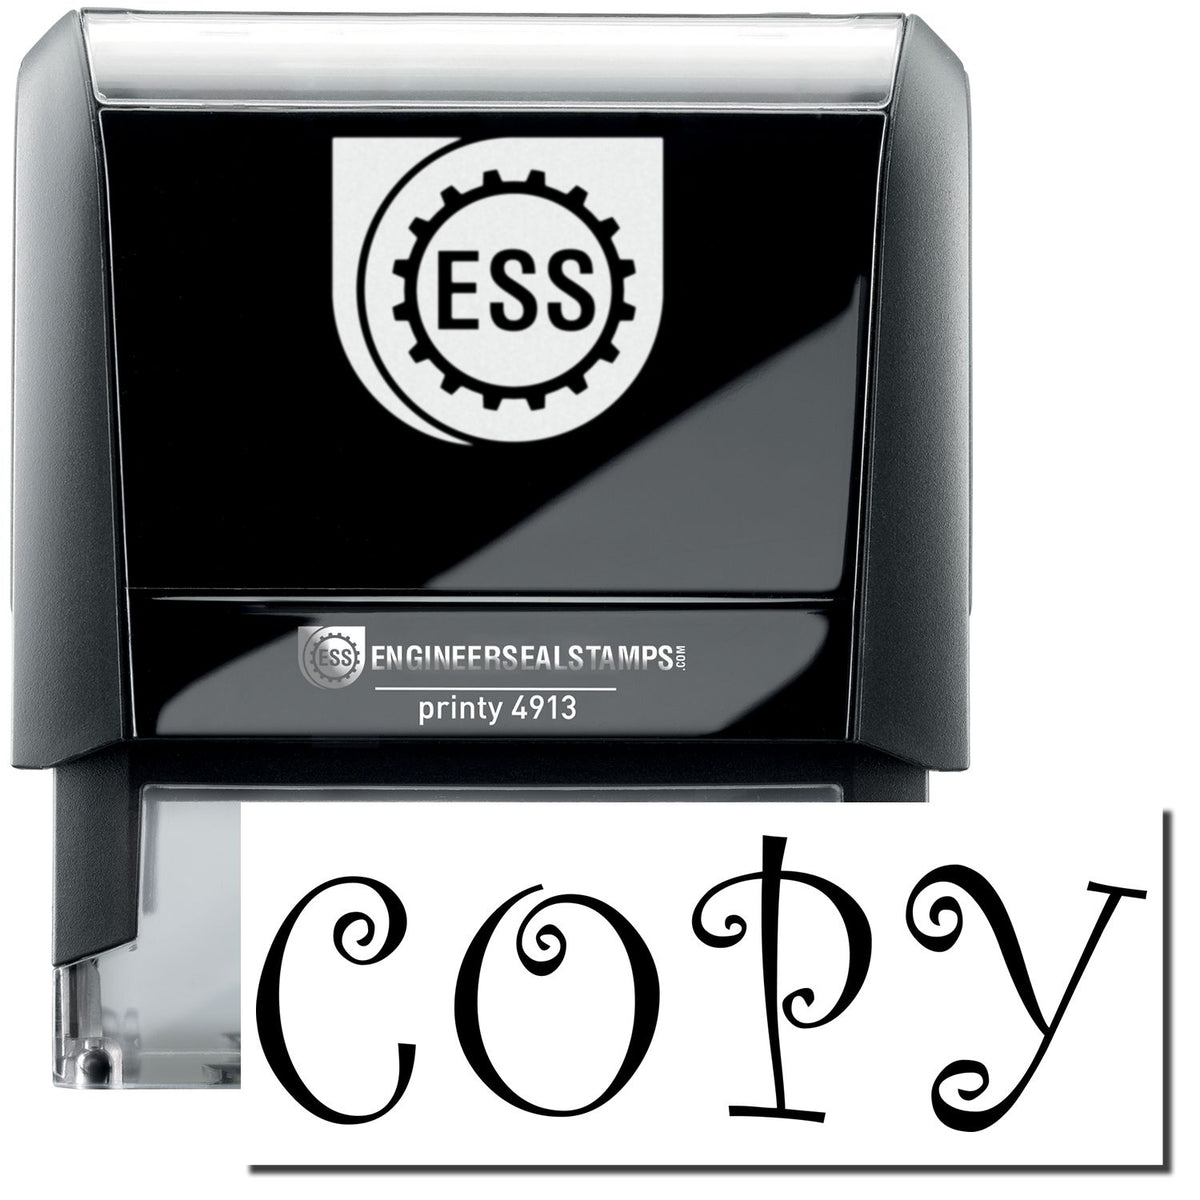 A self-inking stamp with a stamped image showing how the text &quot;COPY&quot; in a large distinguishing curly font is displayed by it after stamping.